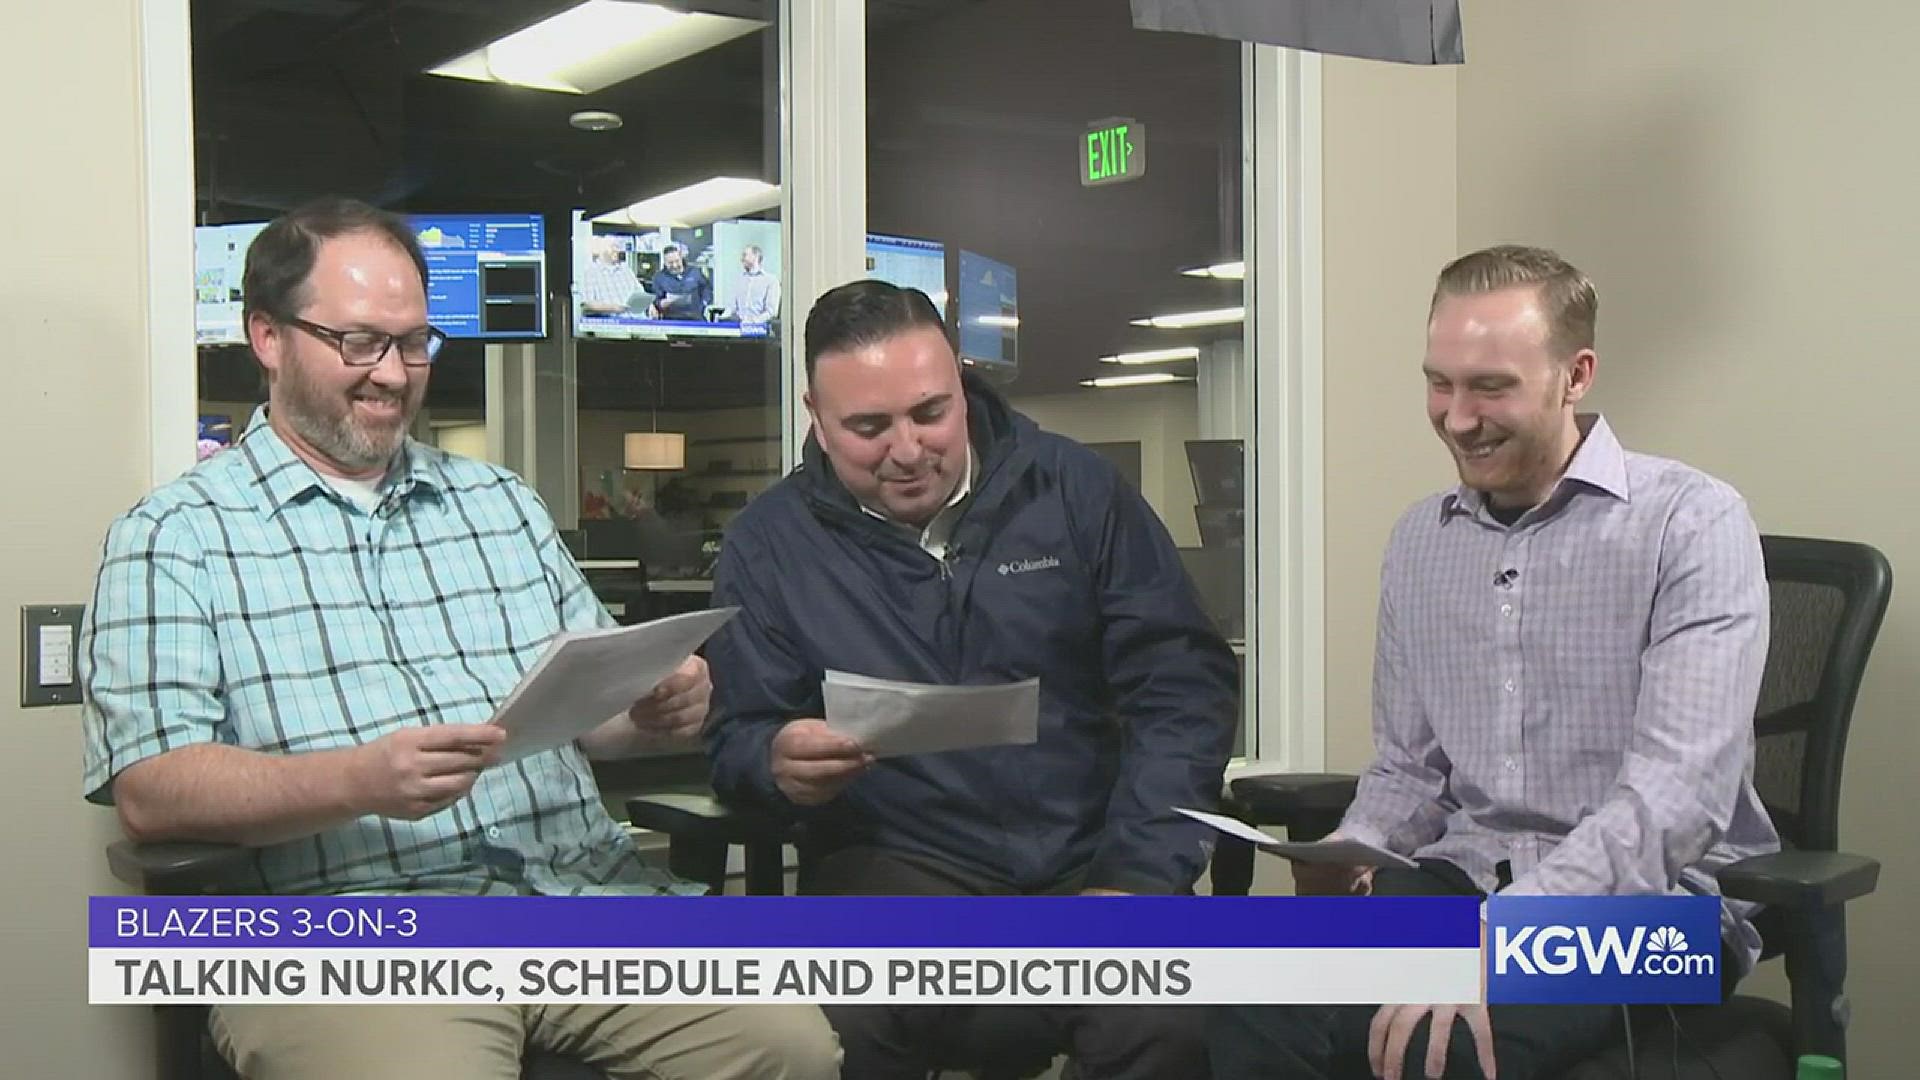 KGW's Jared Cowley, Orlando Sanchez and Nate Hanson predict who will win the Blazers' next four games, against the Pacers, Mavericks, Nuggets and Timberwolves.